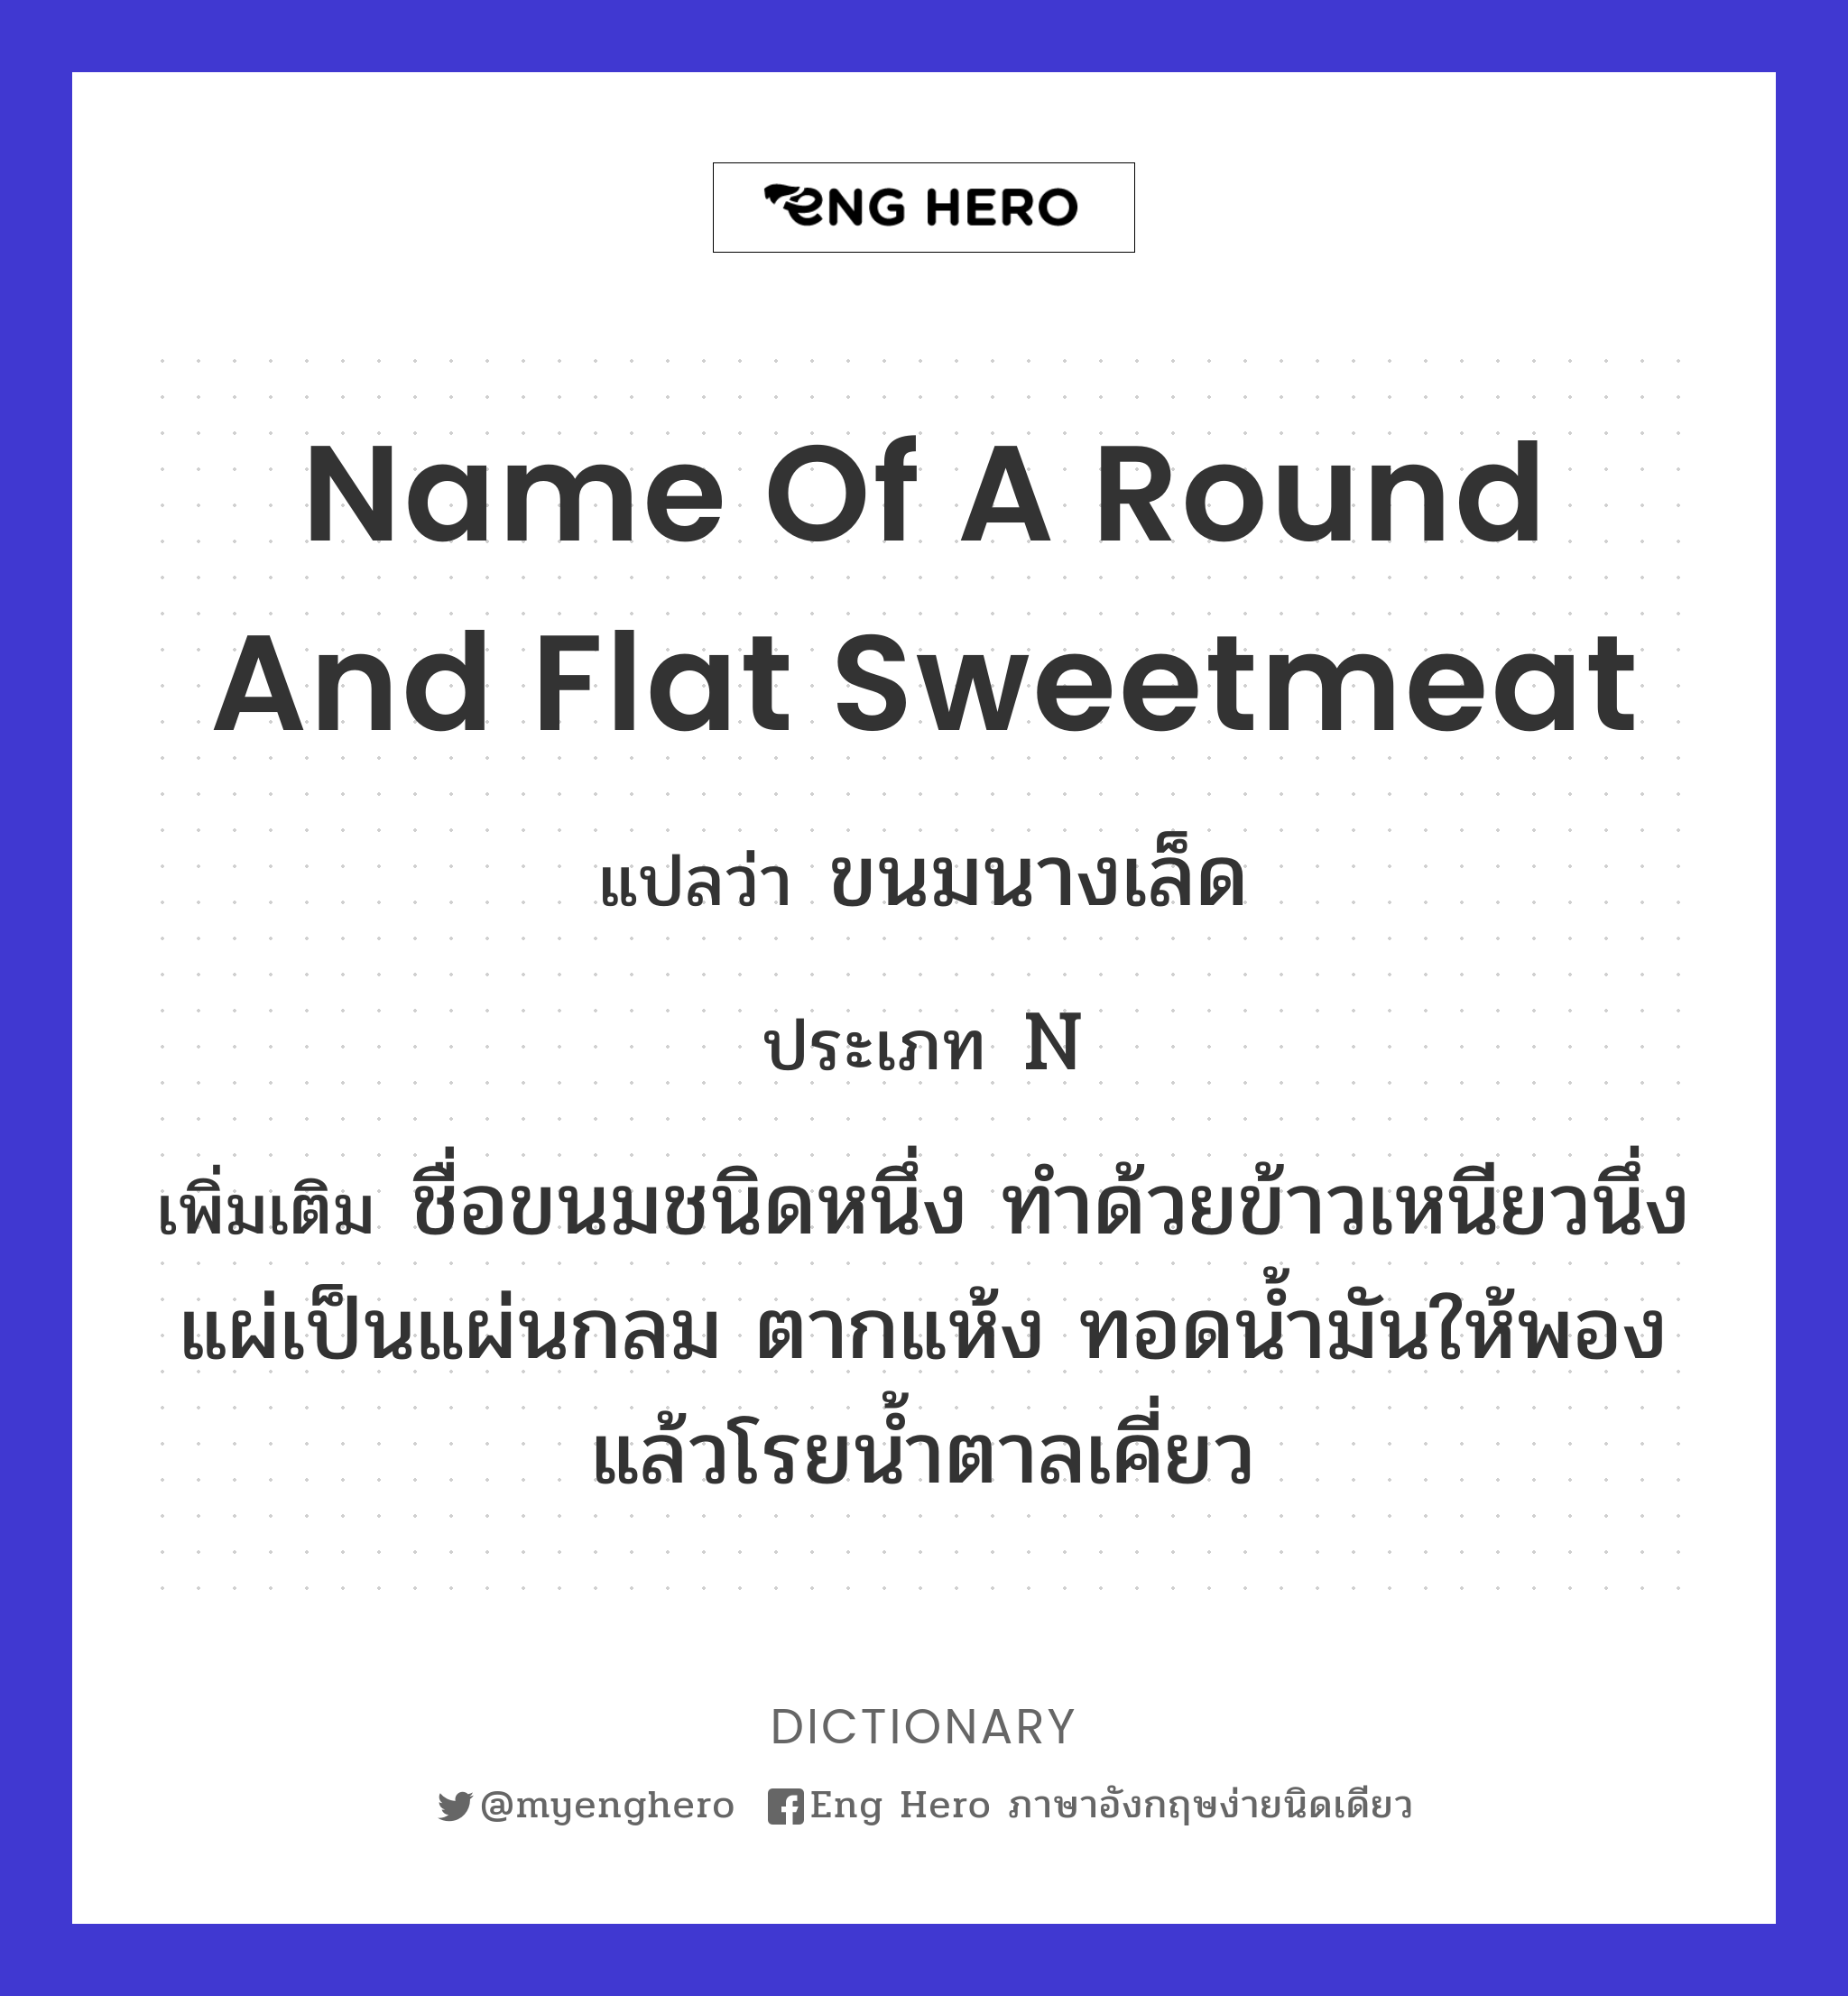 name of a round and flat sweetmeat